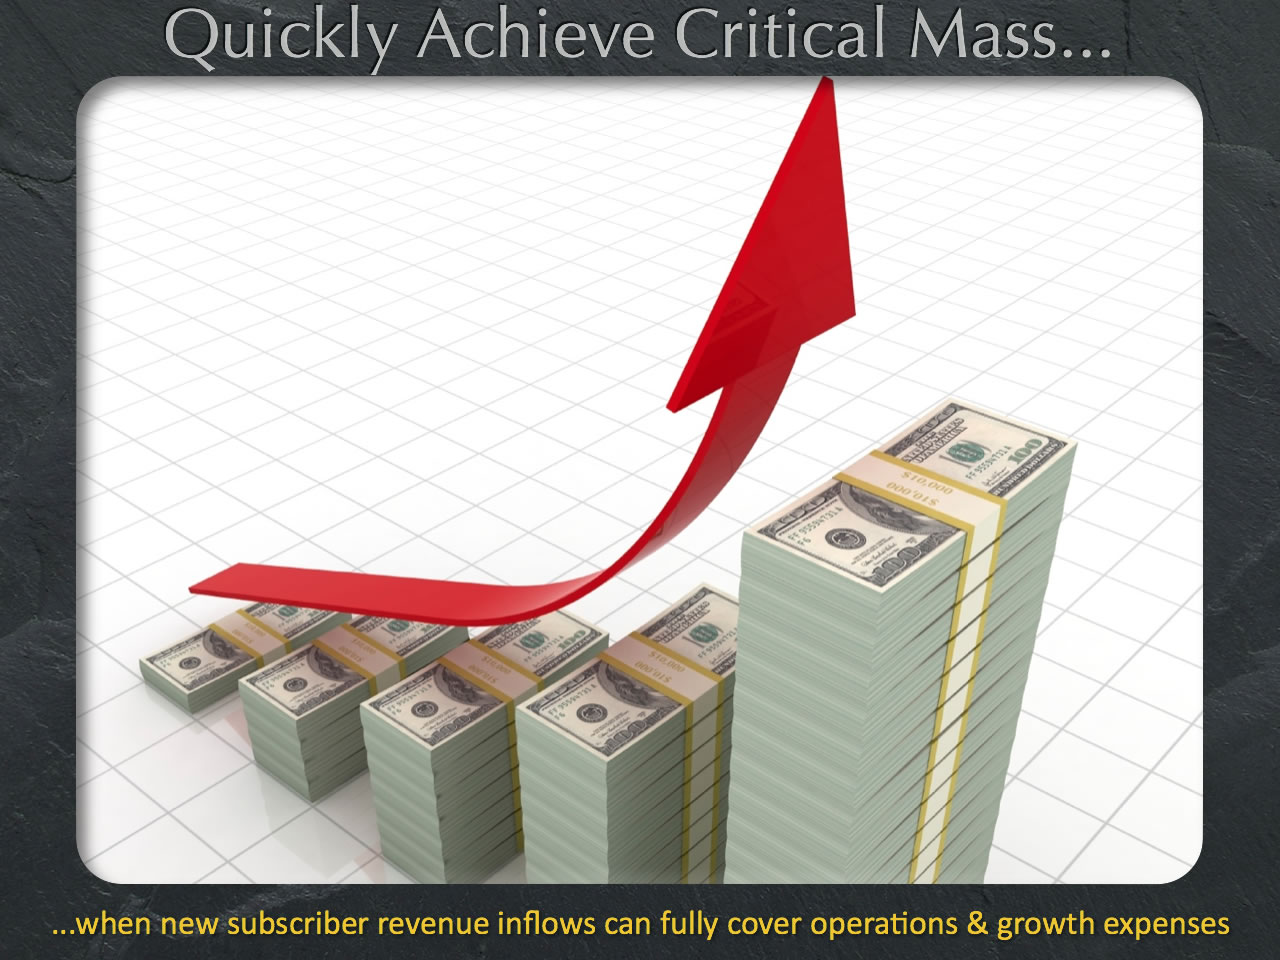 Quickly grow to critical mass, when subscriber revenue inflows exceeds marketing expense outflows